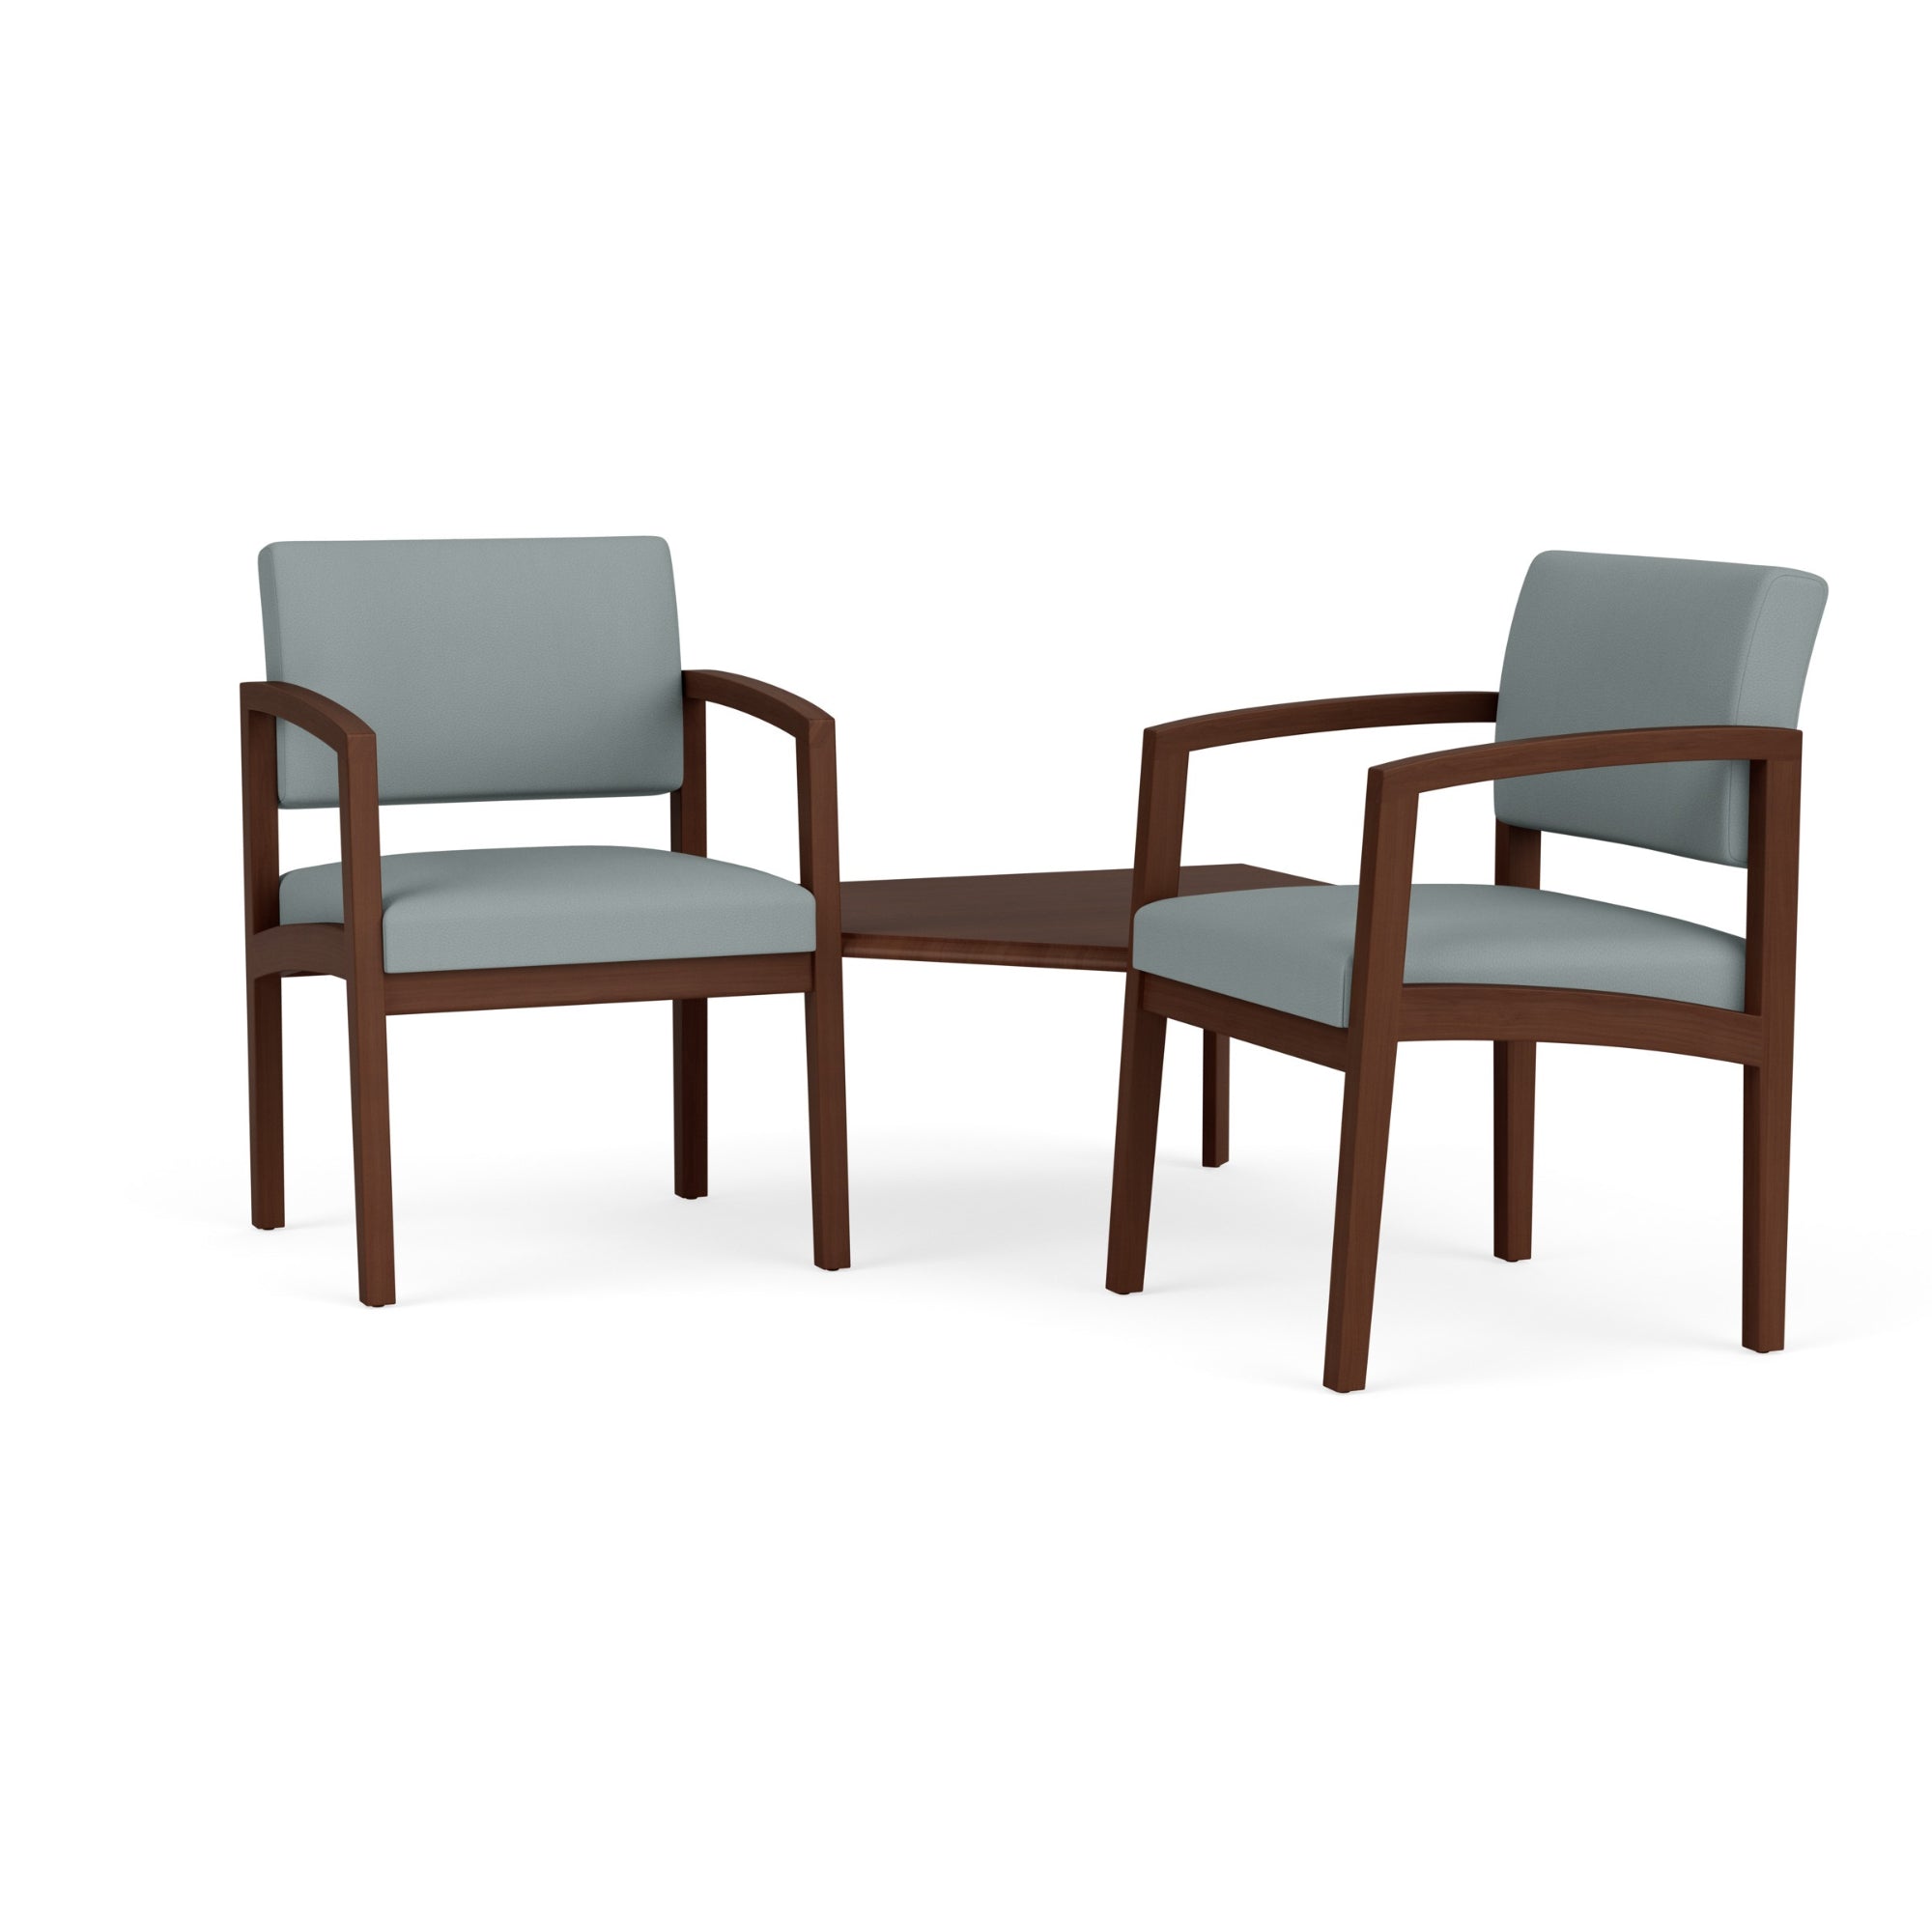 Lenox Wood Collection Reception Seating, 2 Chairs with Solid Wood Connecting Corner Table, Designer Fabric Upholstery, FREE SHIPPING